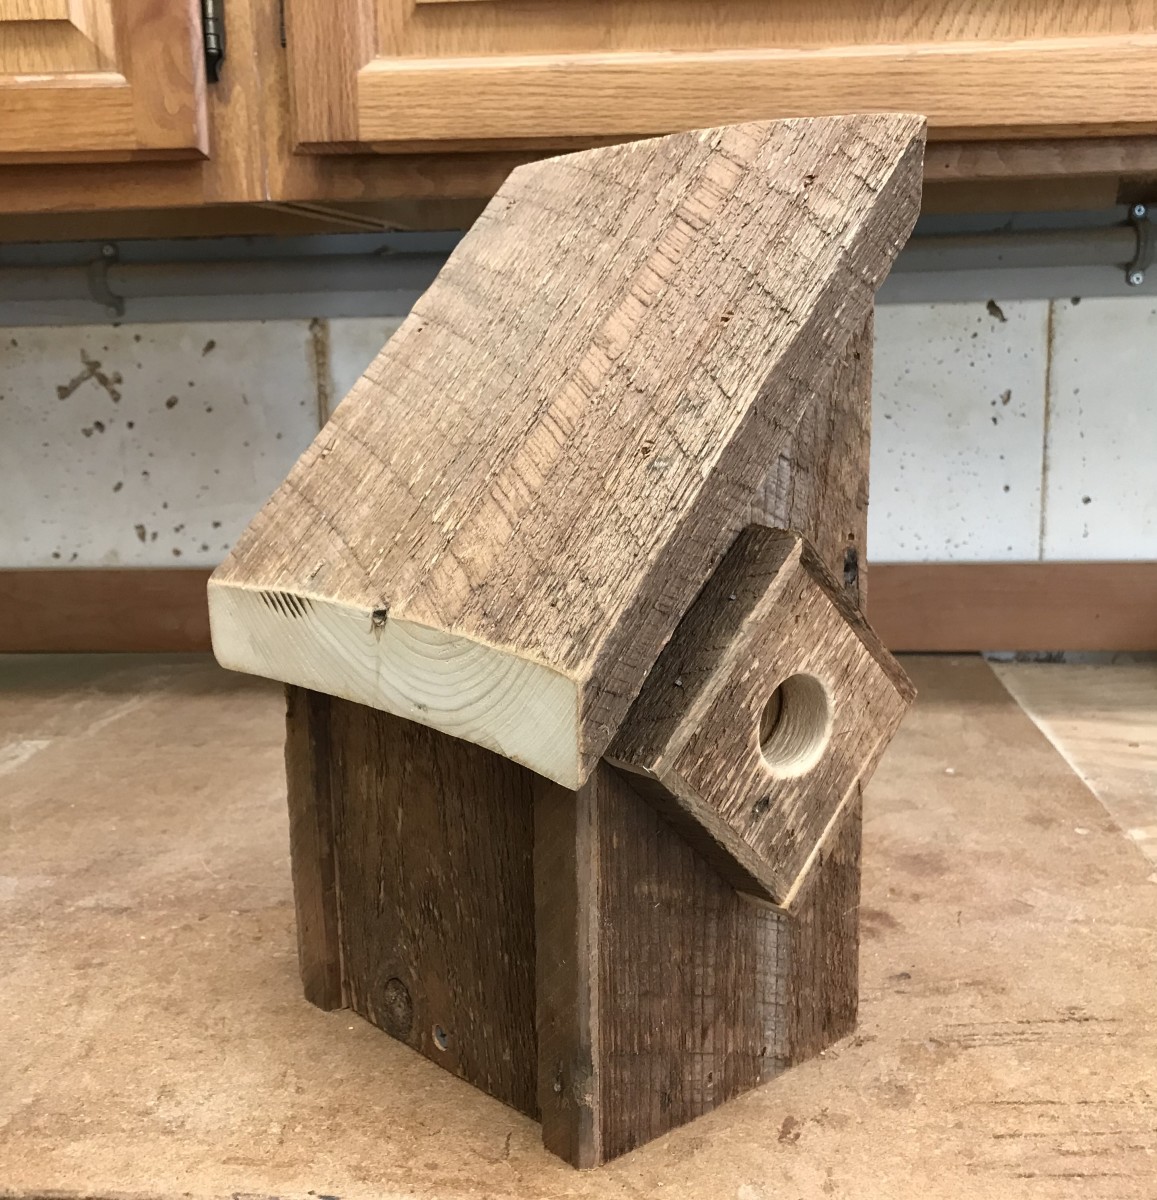 The finished birdhouse is ready for the garden